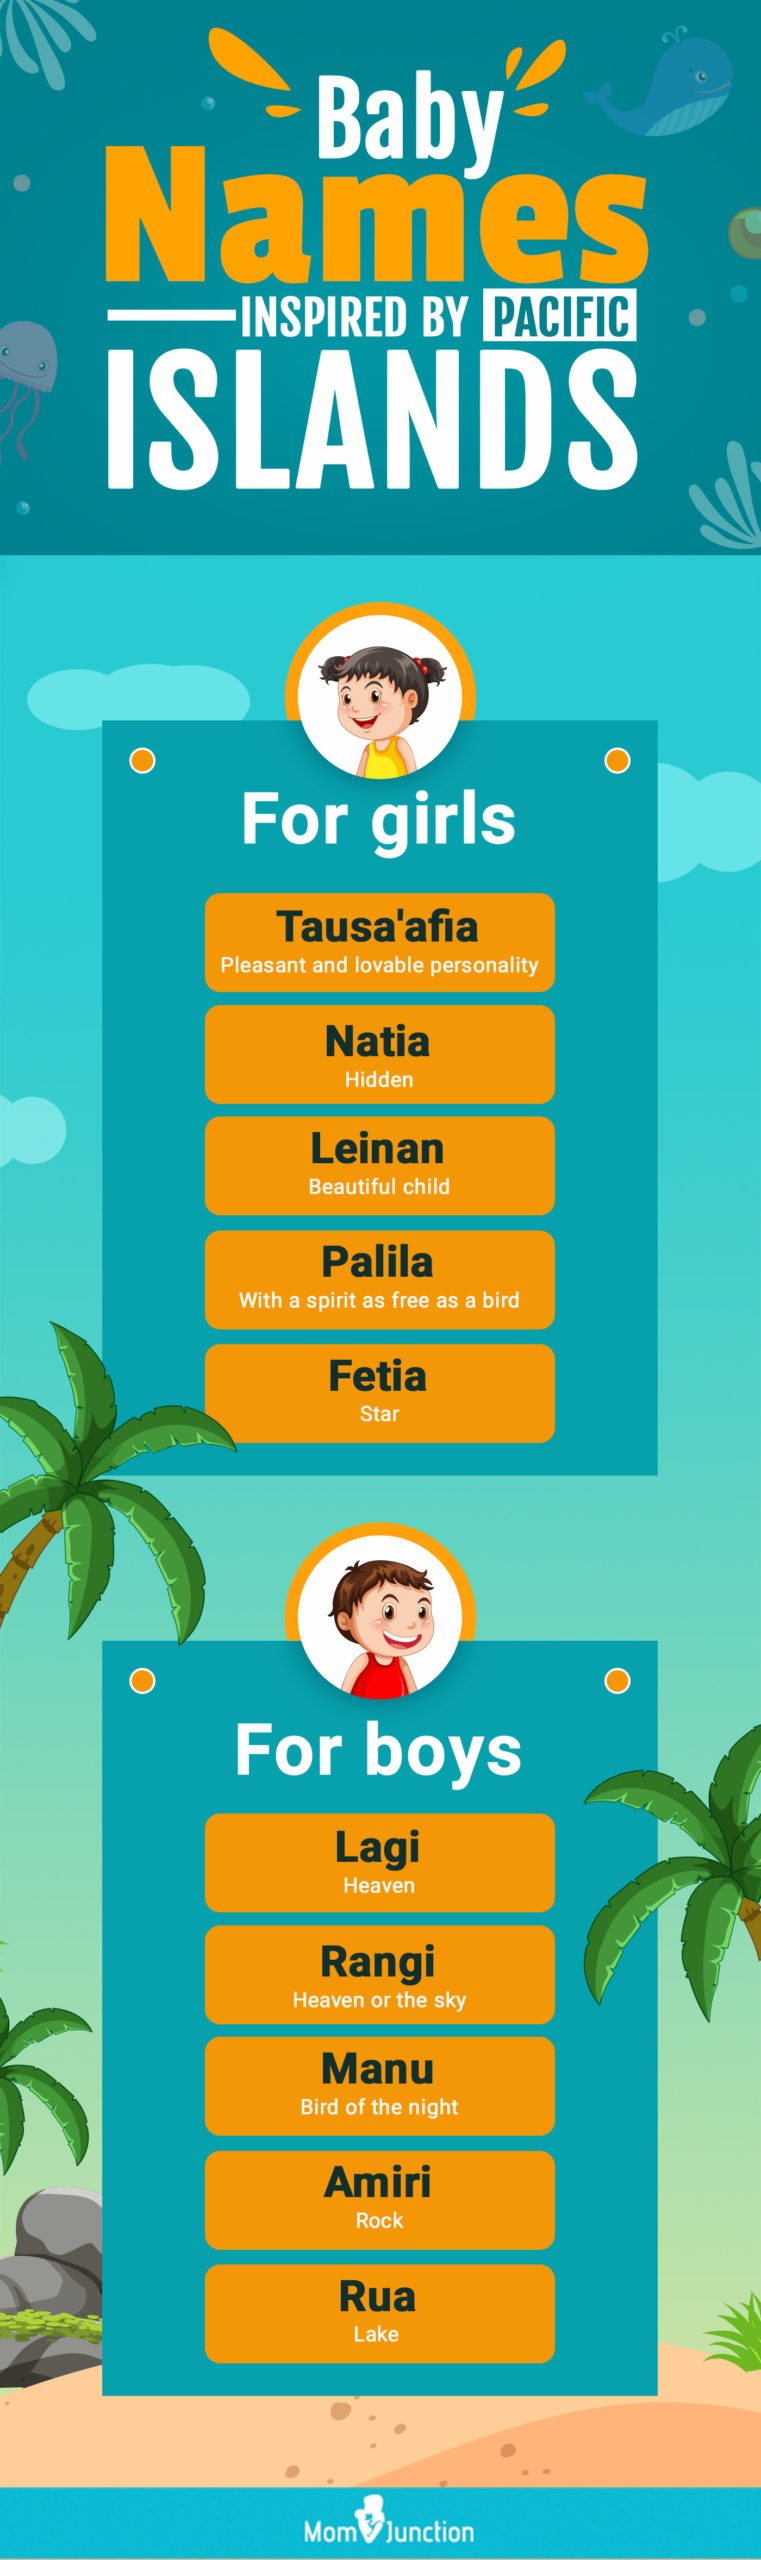 baby names inspired by island [infographic]